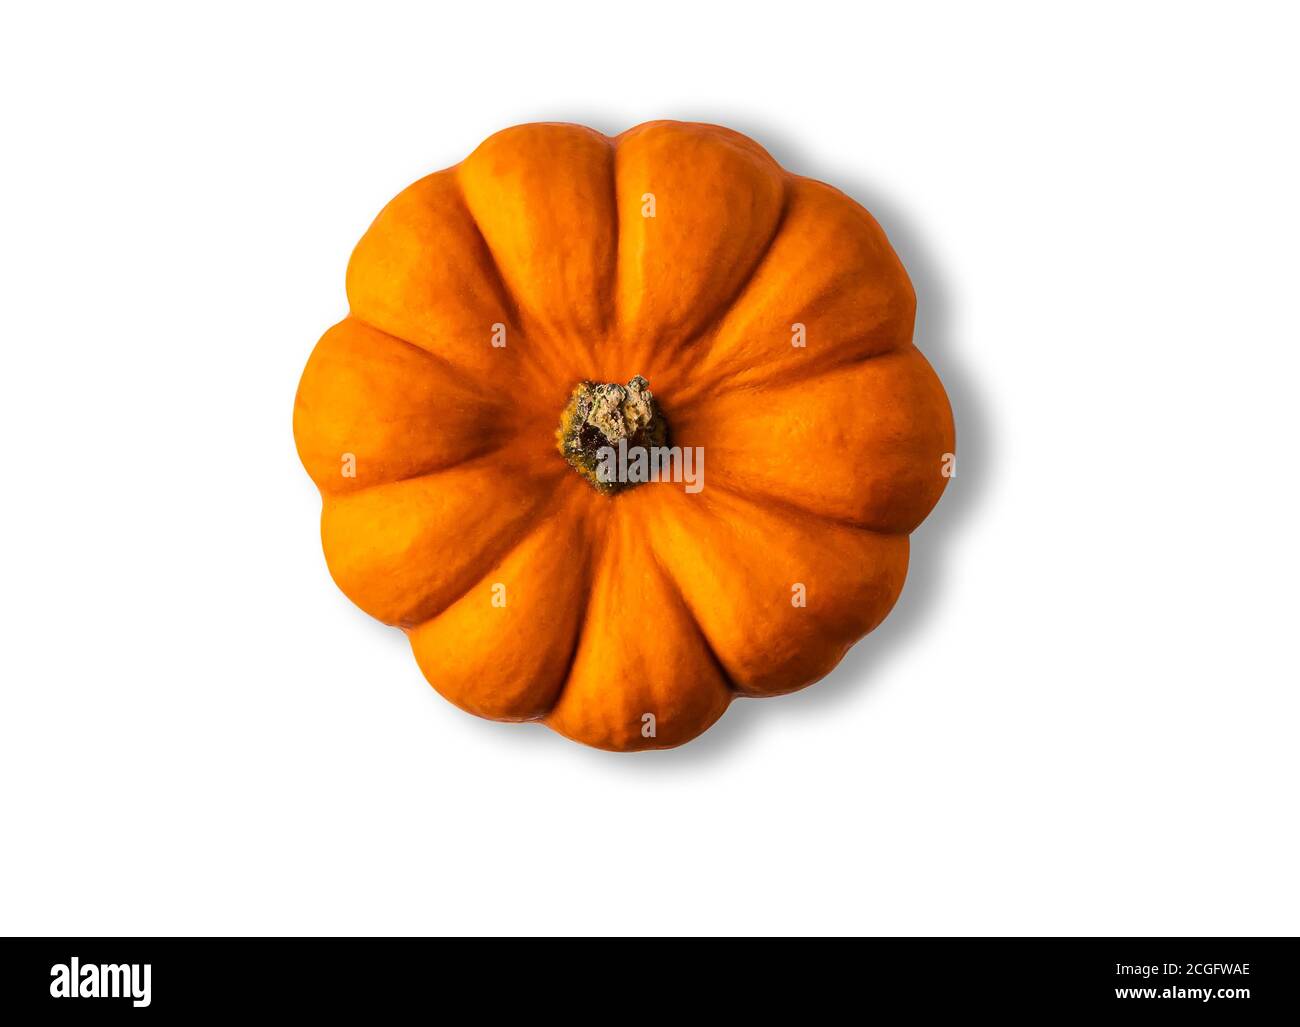 One whole orange pumpkin with its shadow isolated on white background. Directly above view. Horizontal orientation. Copy space. Stock Photo